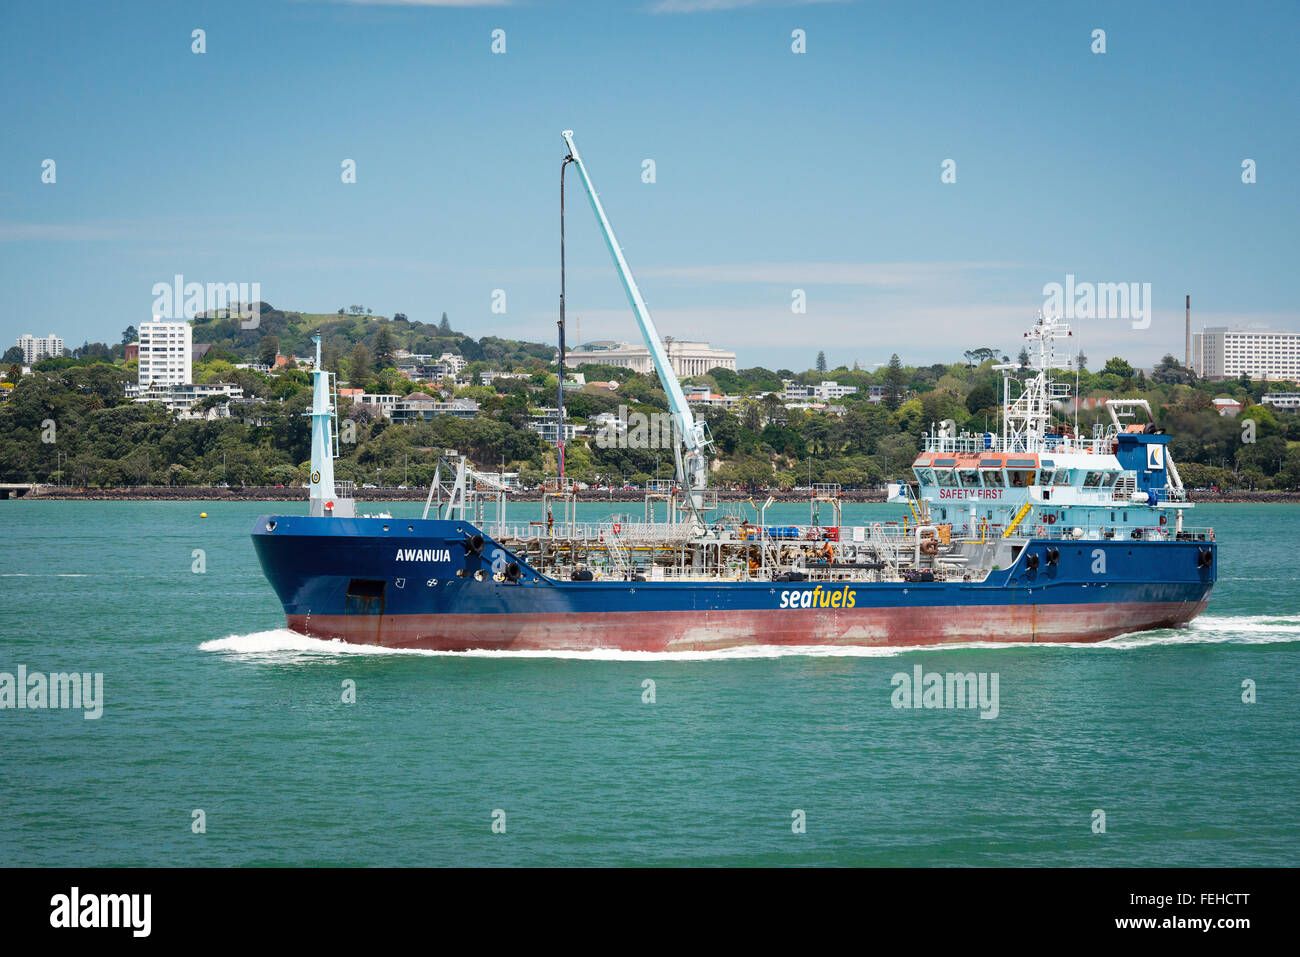 AUCKLAND, NEW ZEALAND - NOV 8 2015: Seafuel tanker Awanuia sailing on bay. Seafuel tanker provides refuelling vessel service. Stock Photo